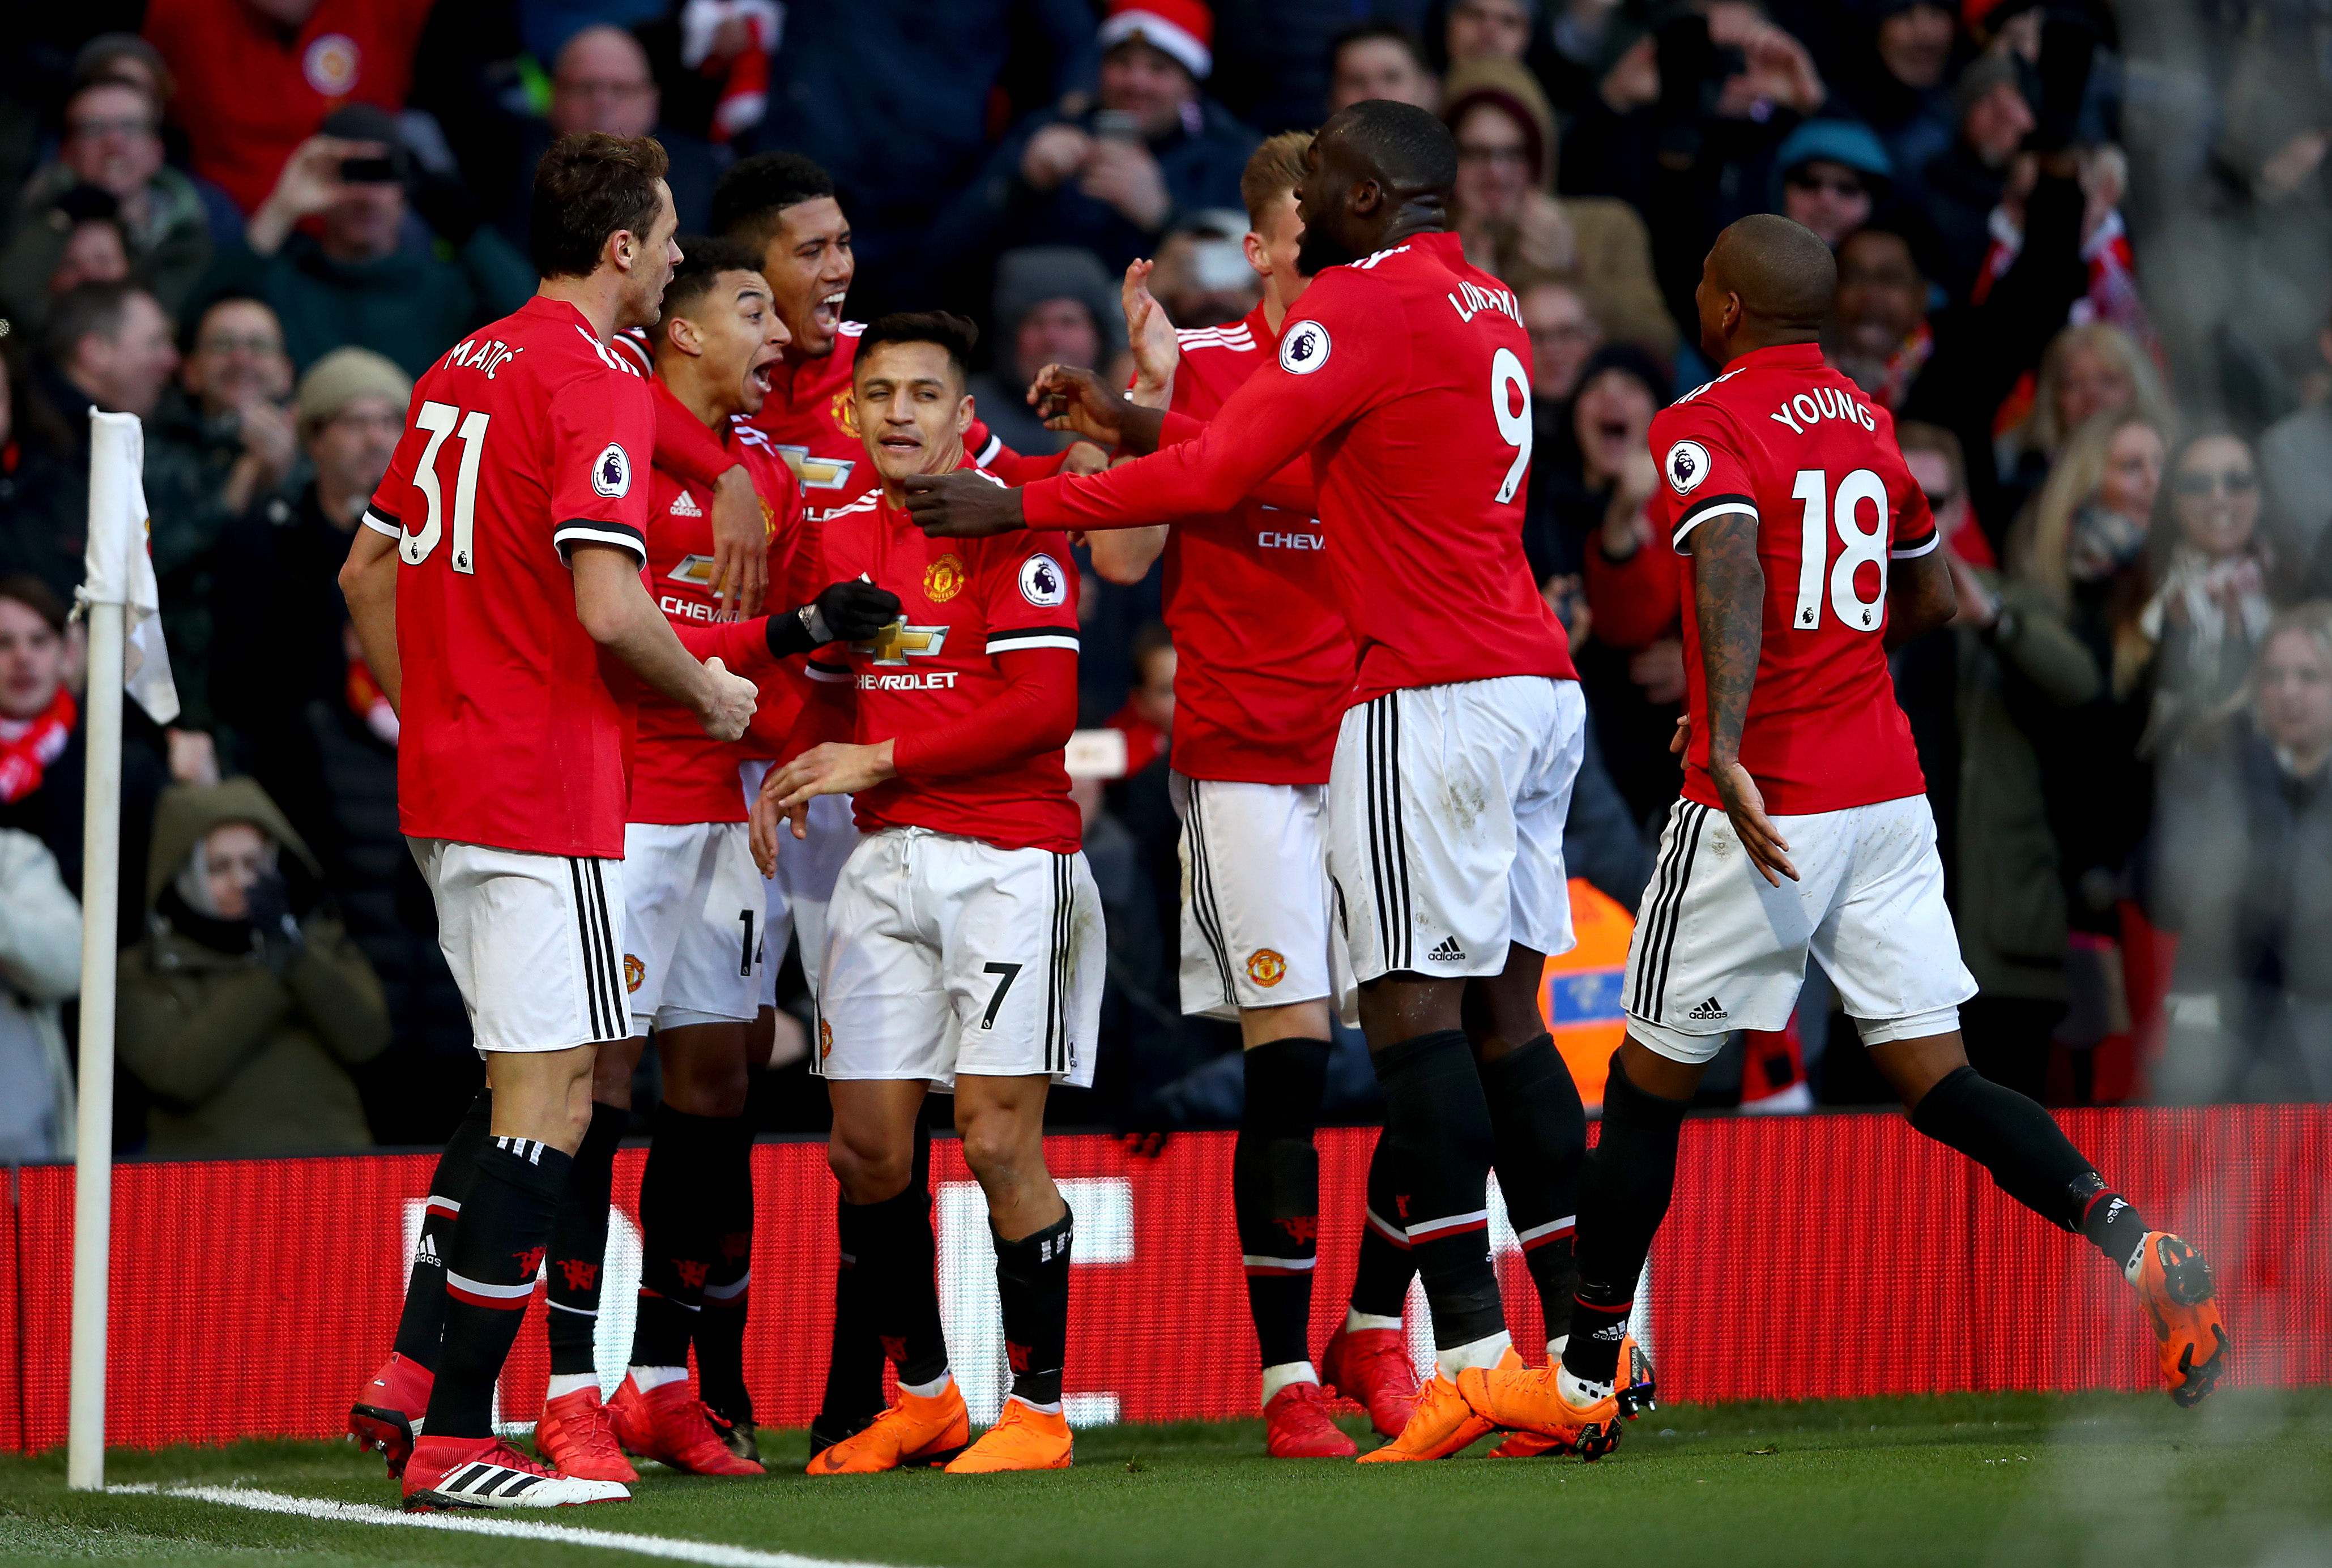 MANCHESTER, ENGLAND - FEBRUARY 25:  Jesse Lingard of Manchester United celebrates after scoring his sides second goal with team mates during the Premier League match between Manchester United and Chelsea at Old Trafford on February 25, 2018 in Manchester, England.  (Photo by Clive Brunskill/Getty Images)